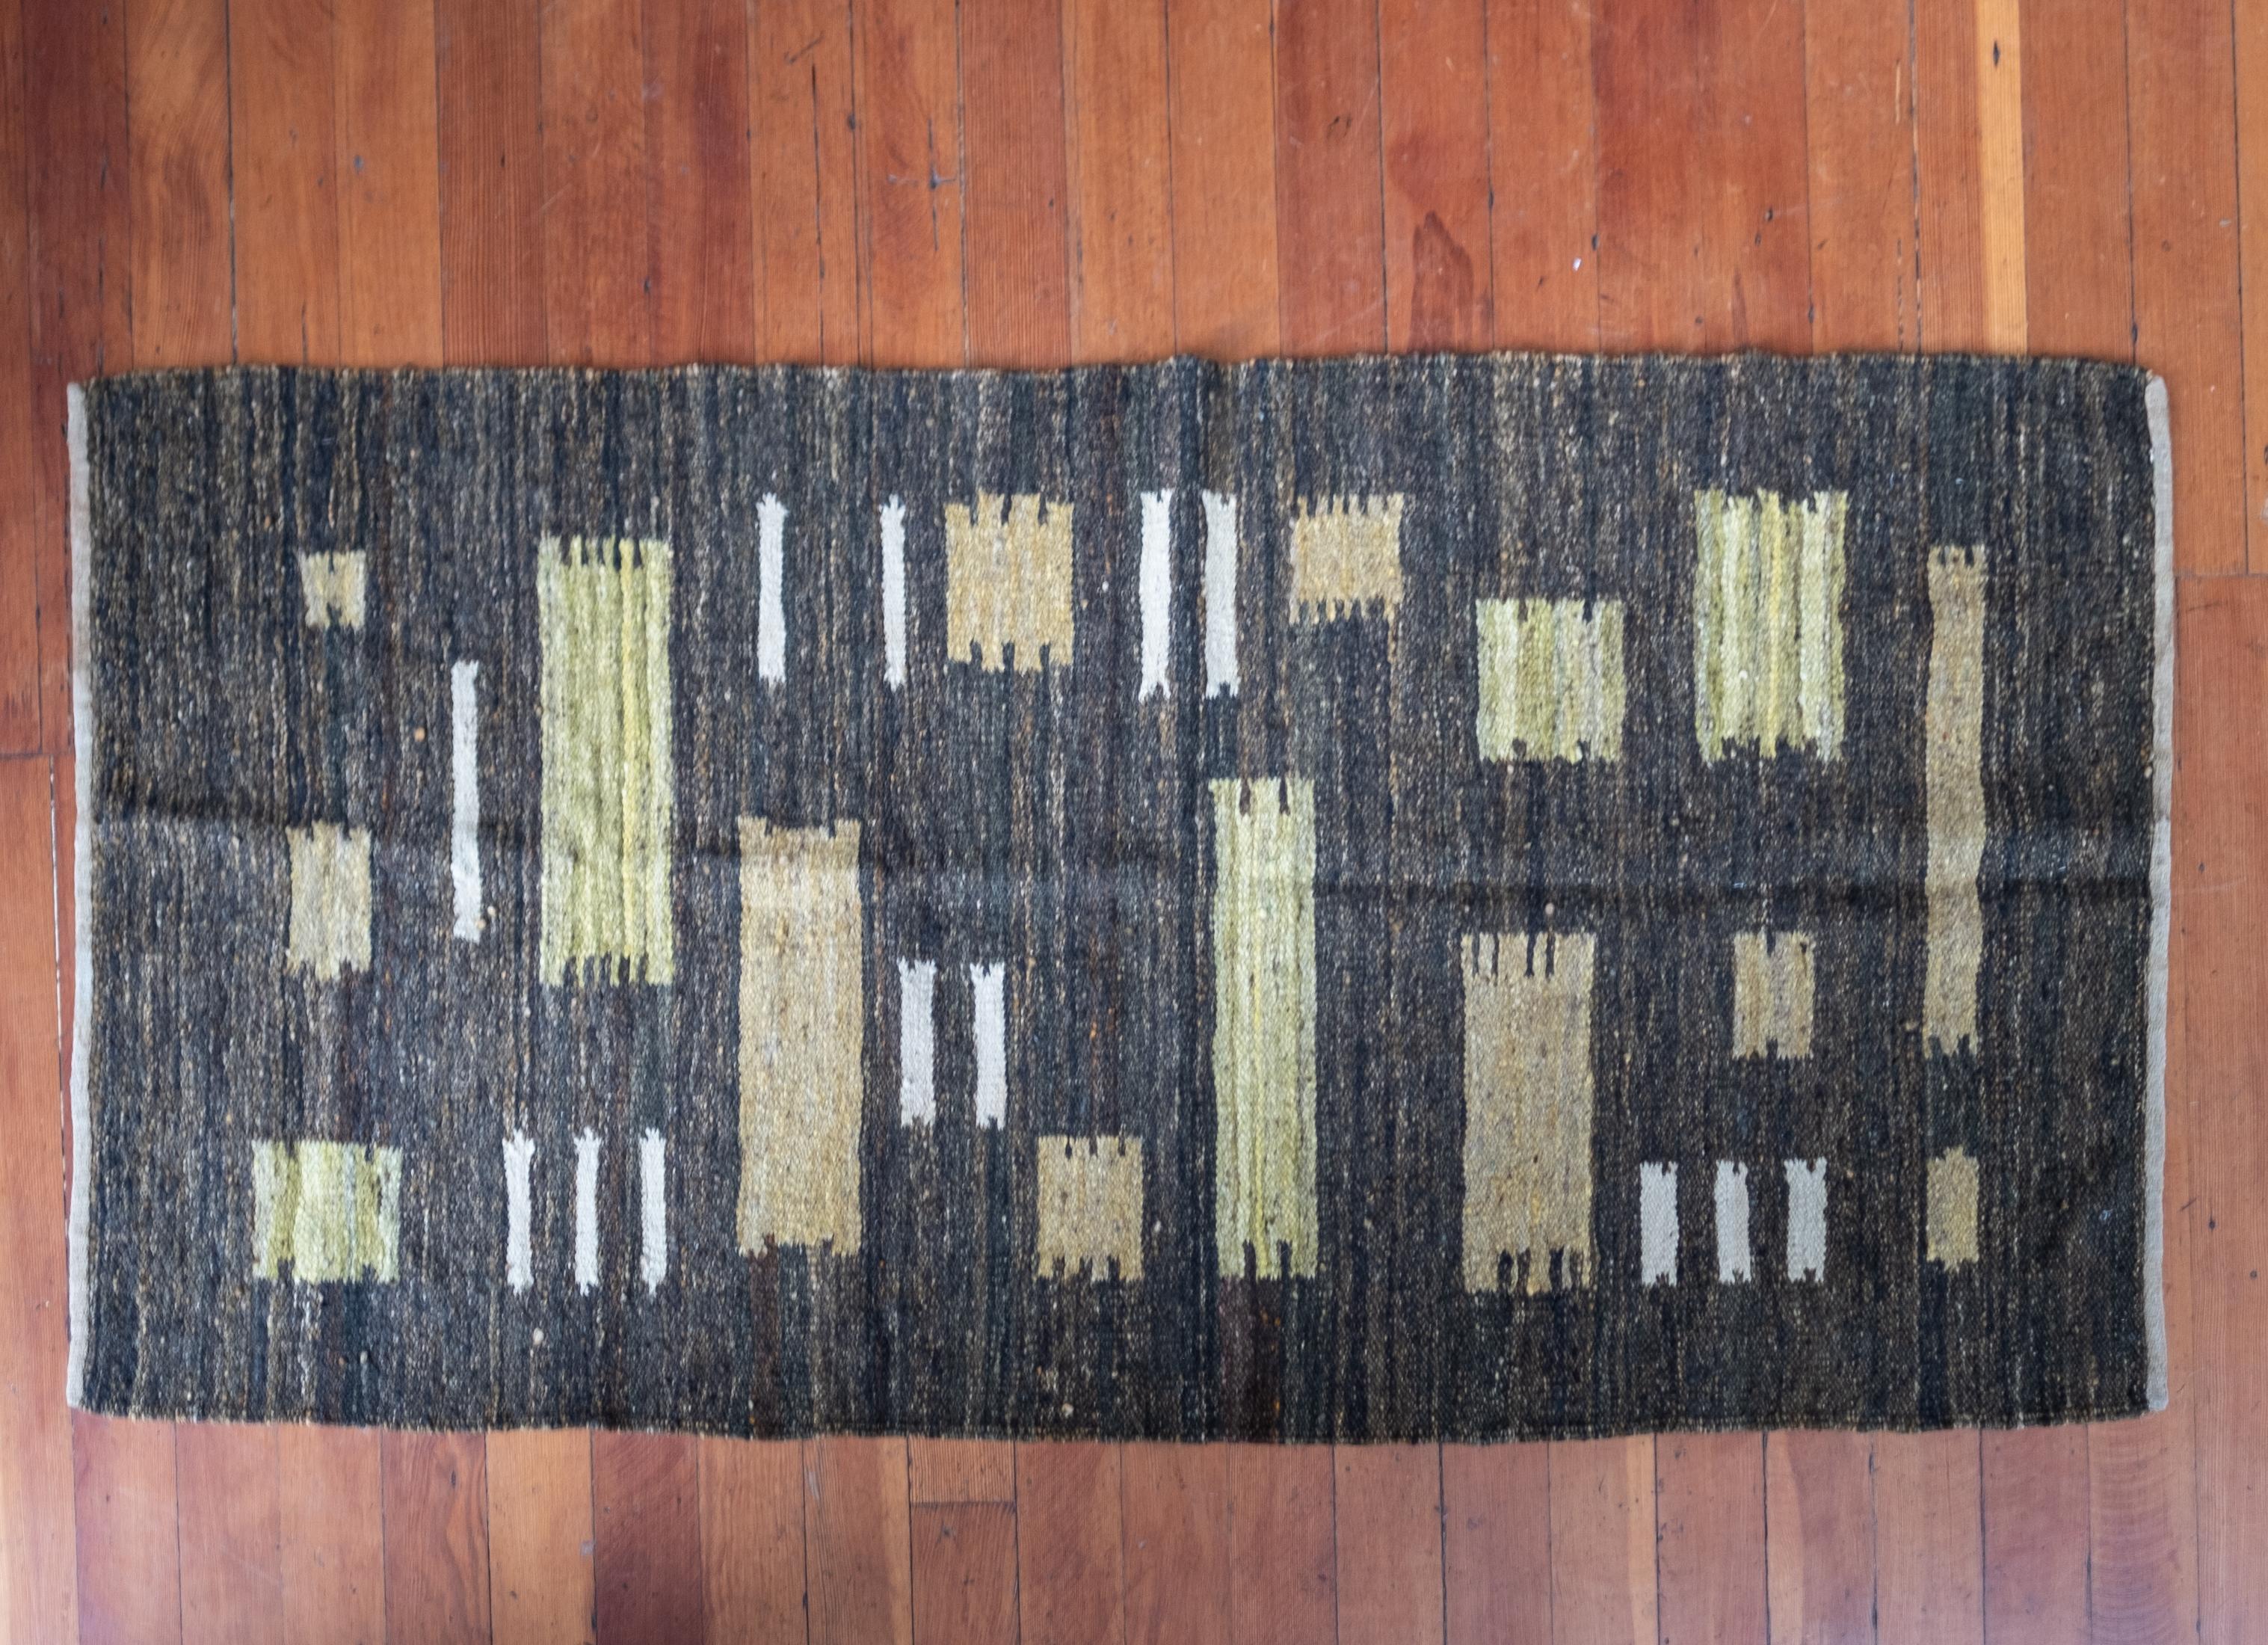 Geometric flat-weave rug with a Bauhaus aesthetic.